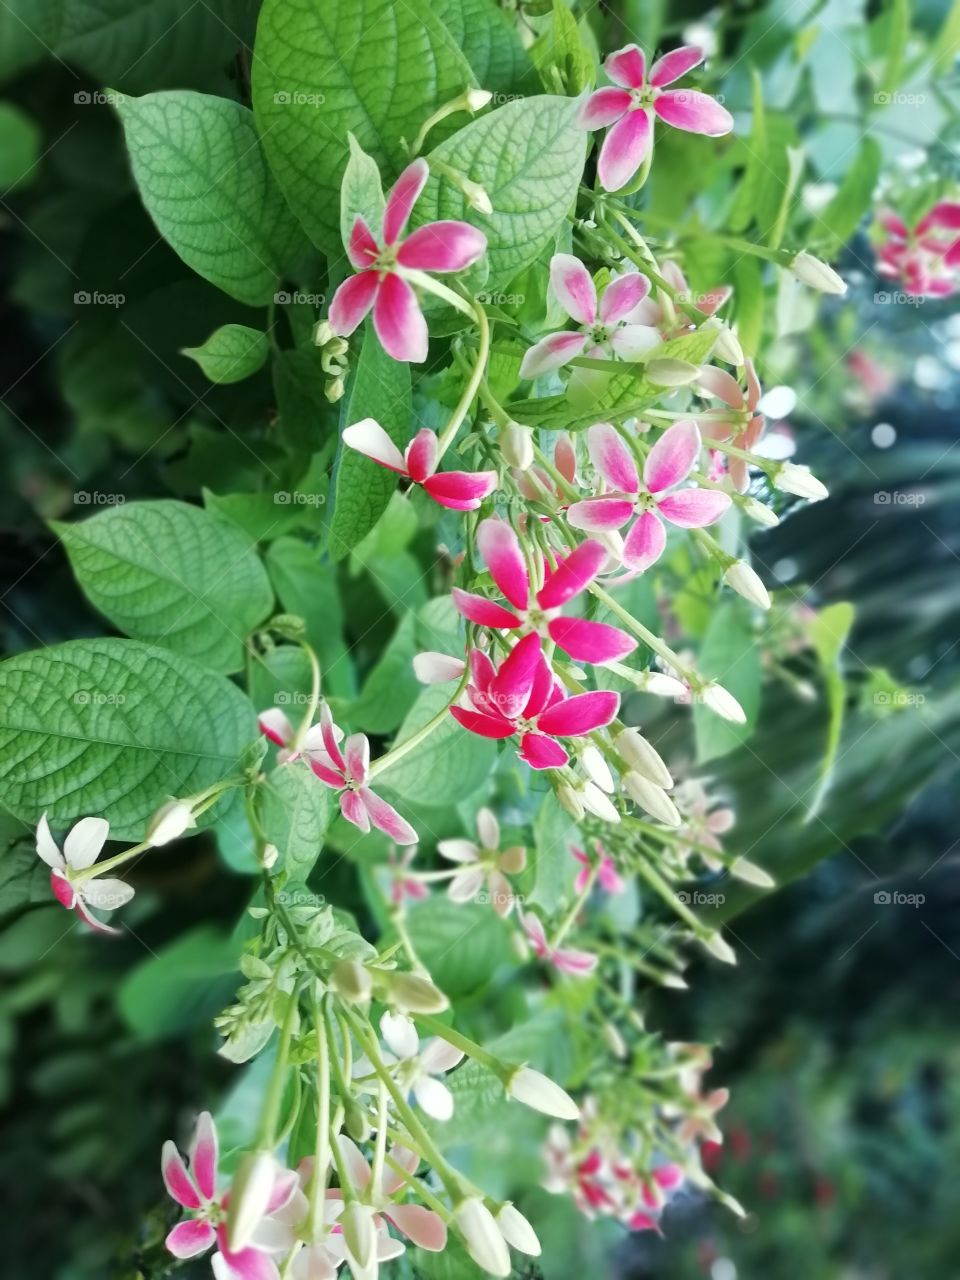 Bunch of white and pink flowers in a garden